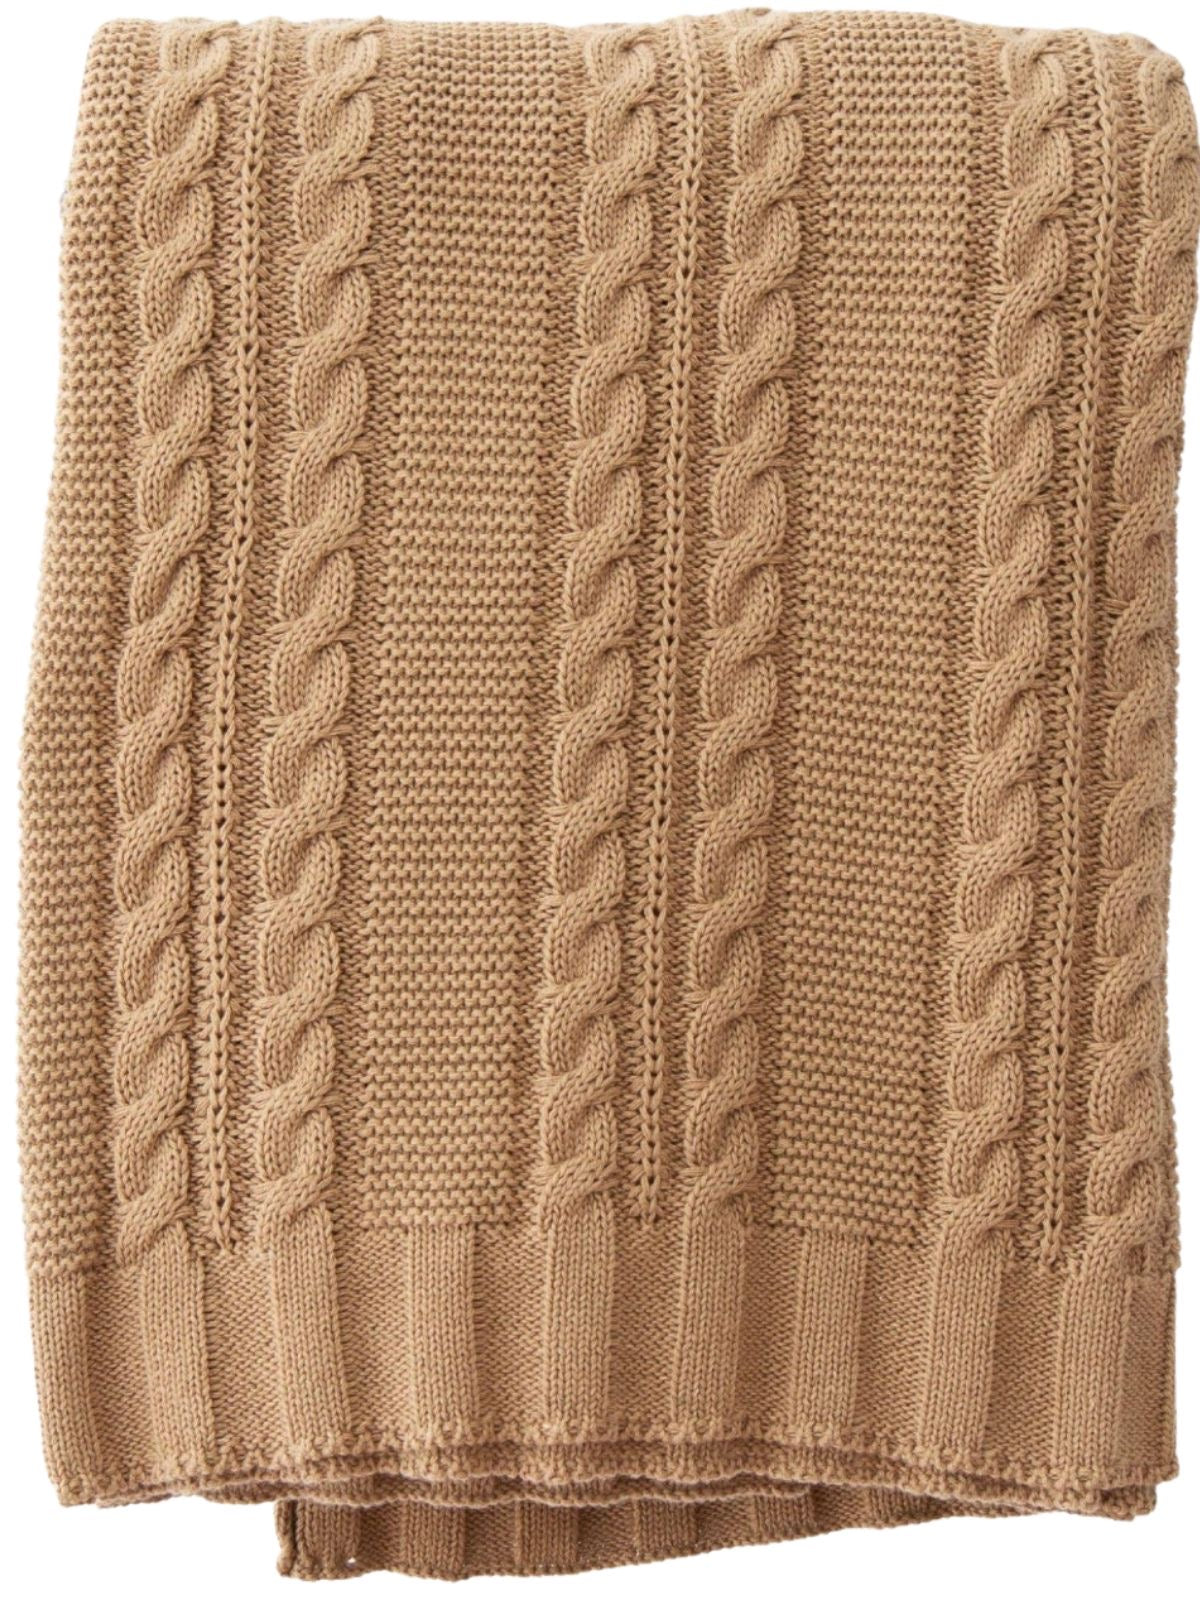 100% Cotton Cable Knit Decorative Throw Blanket in Beige, 50W x 60L. Sold by KYA Home Decor.